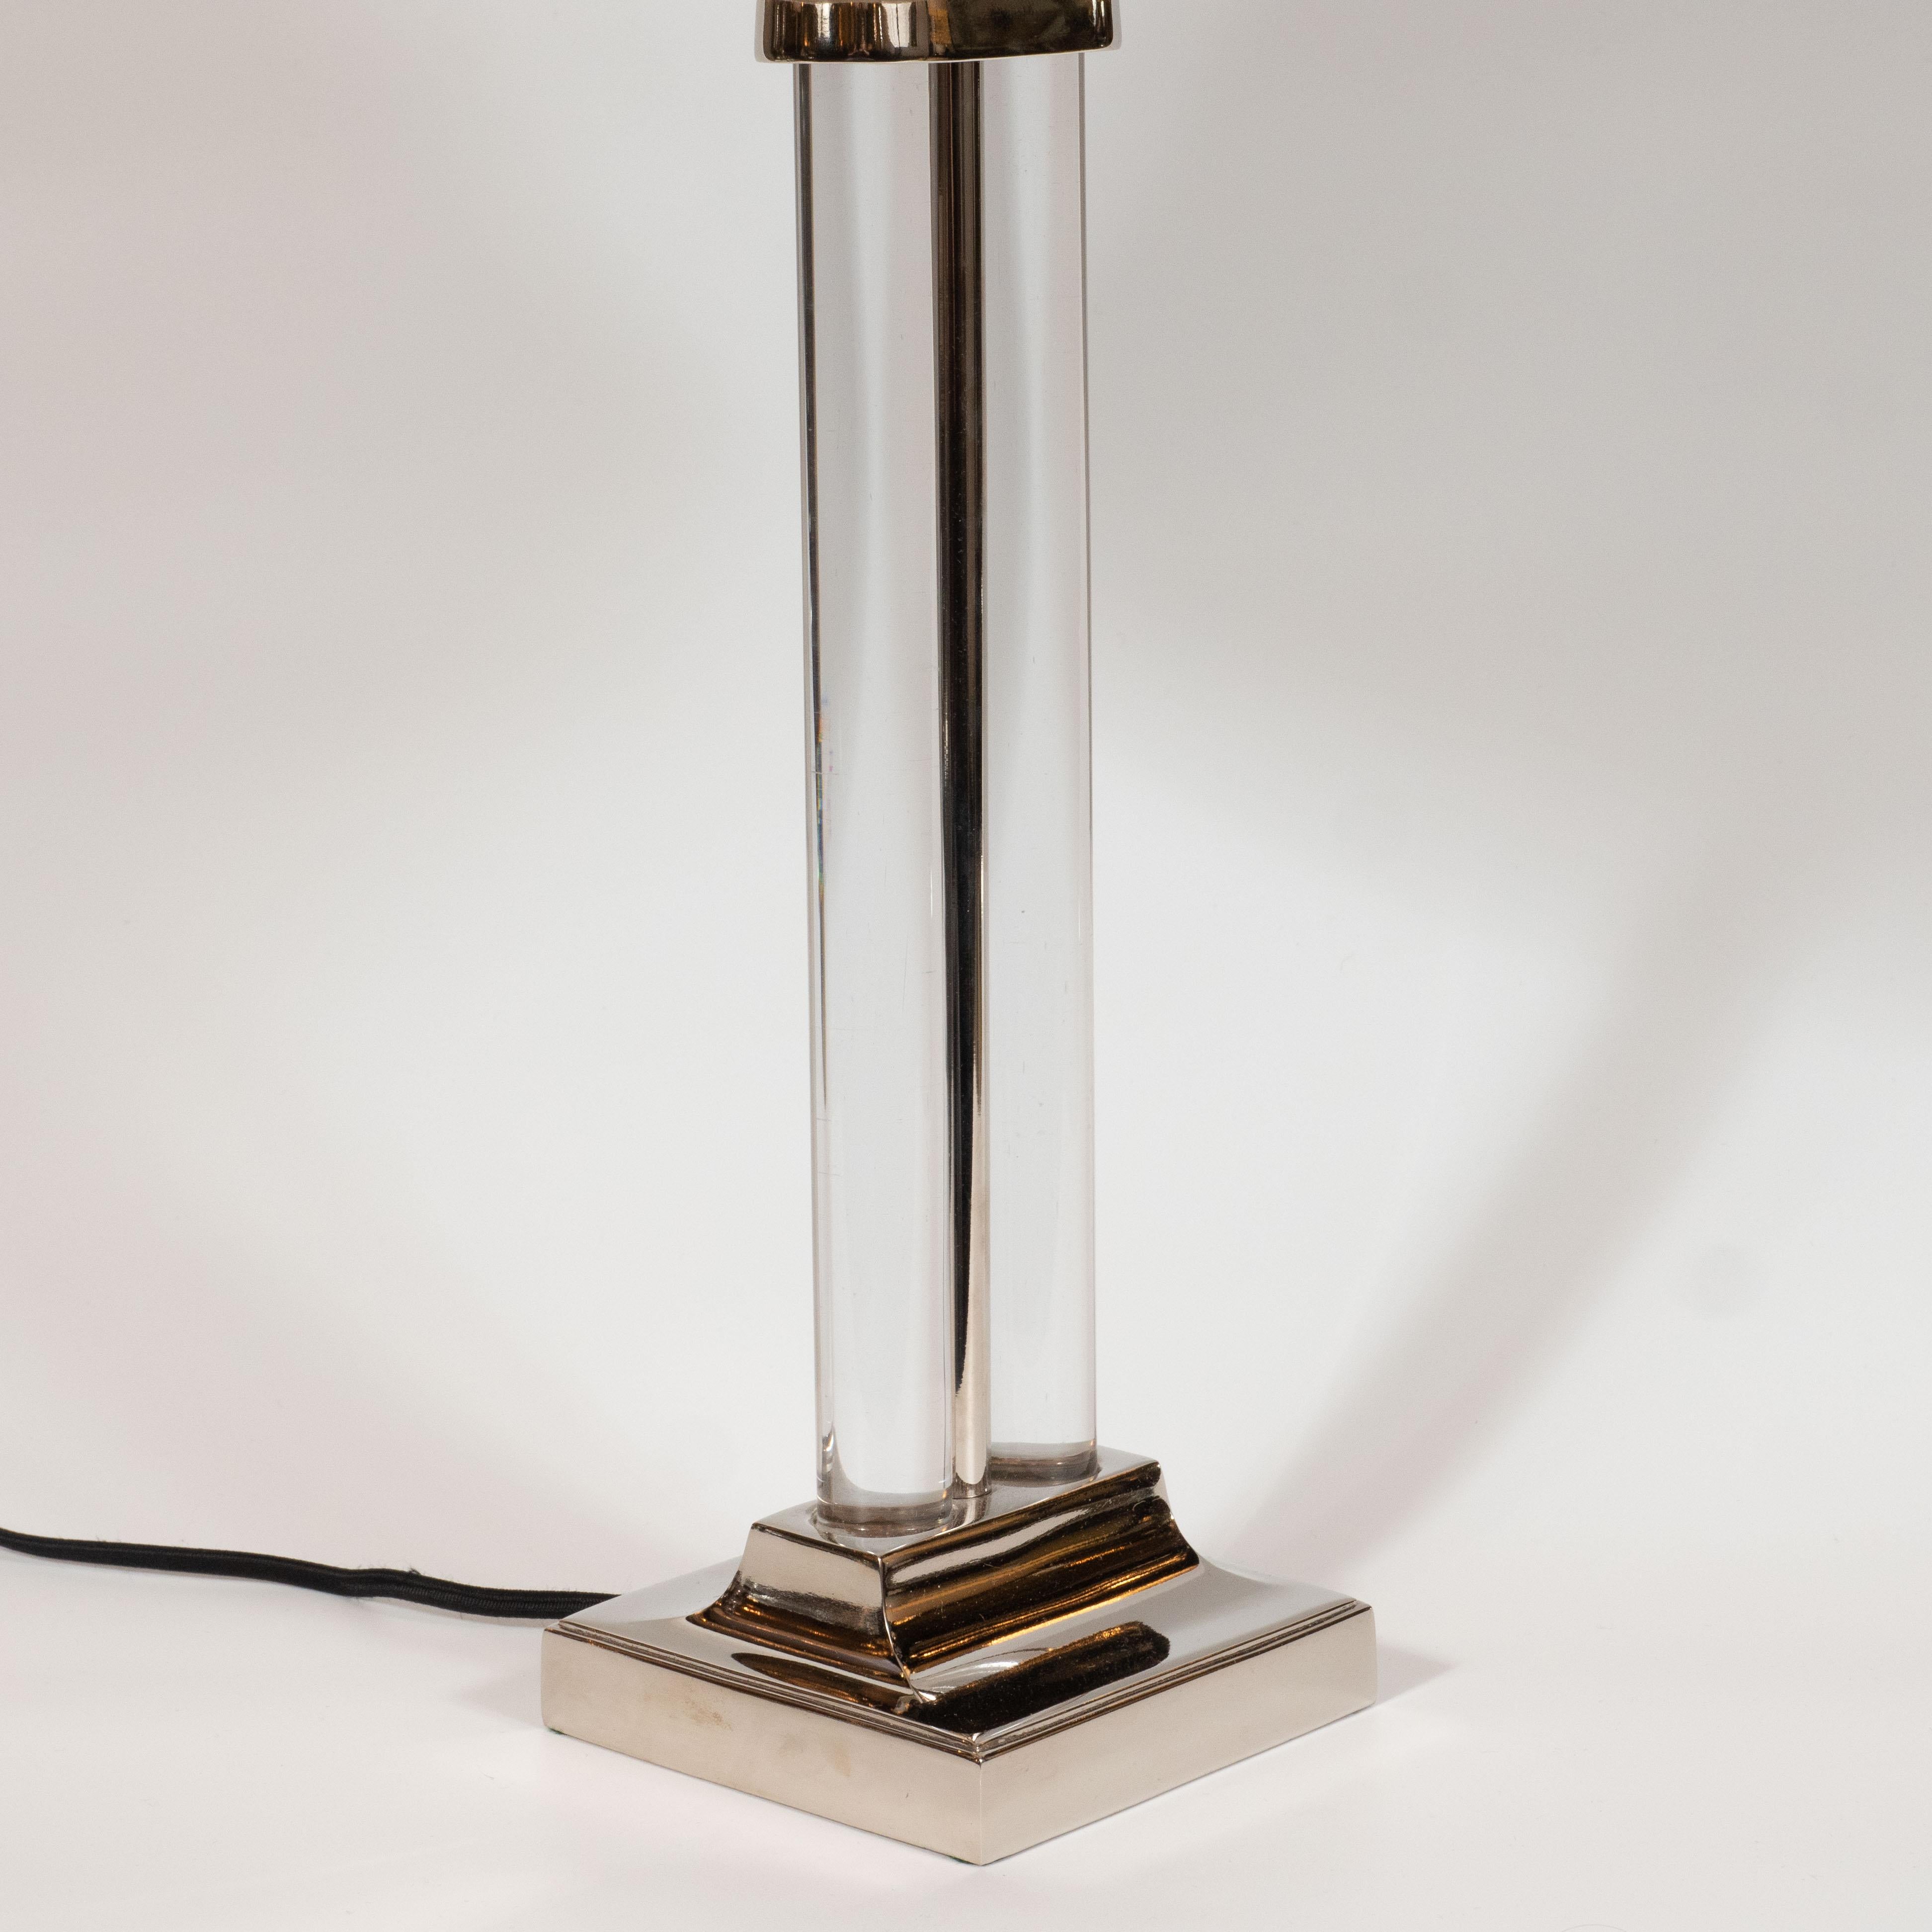 Mid-20th Century Art Deco Glass and Nickel Table Lamp by Gilbert Rohde for MSLC